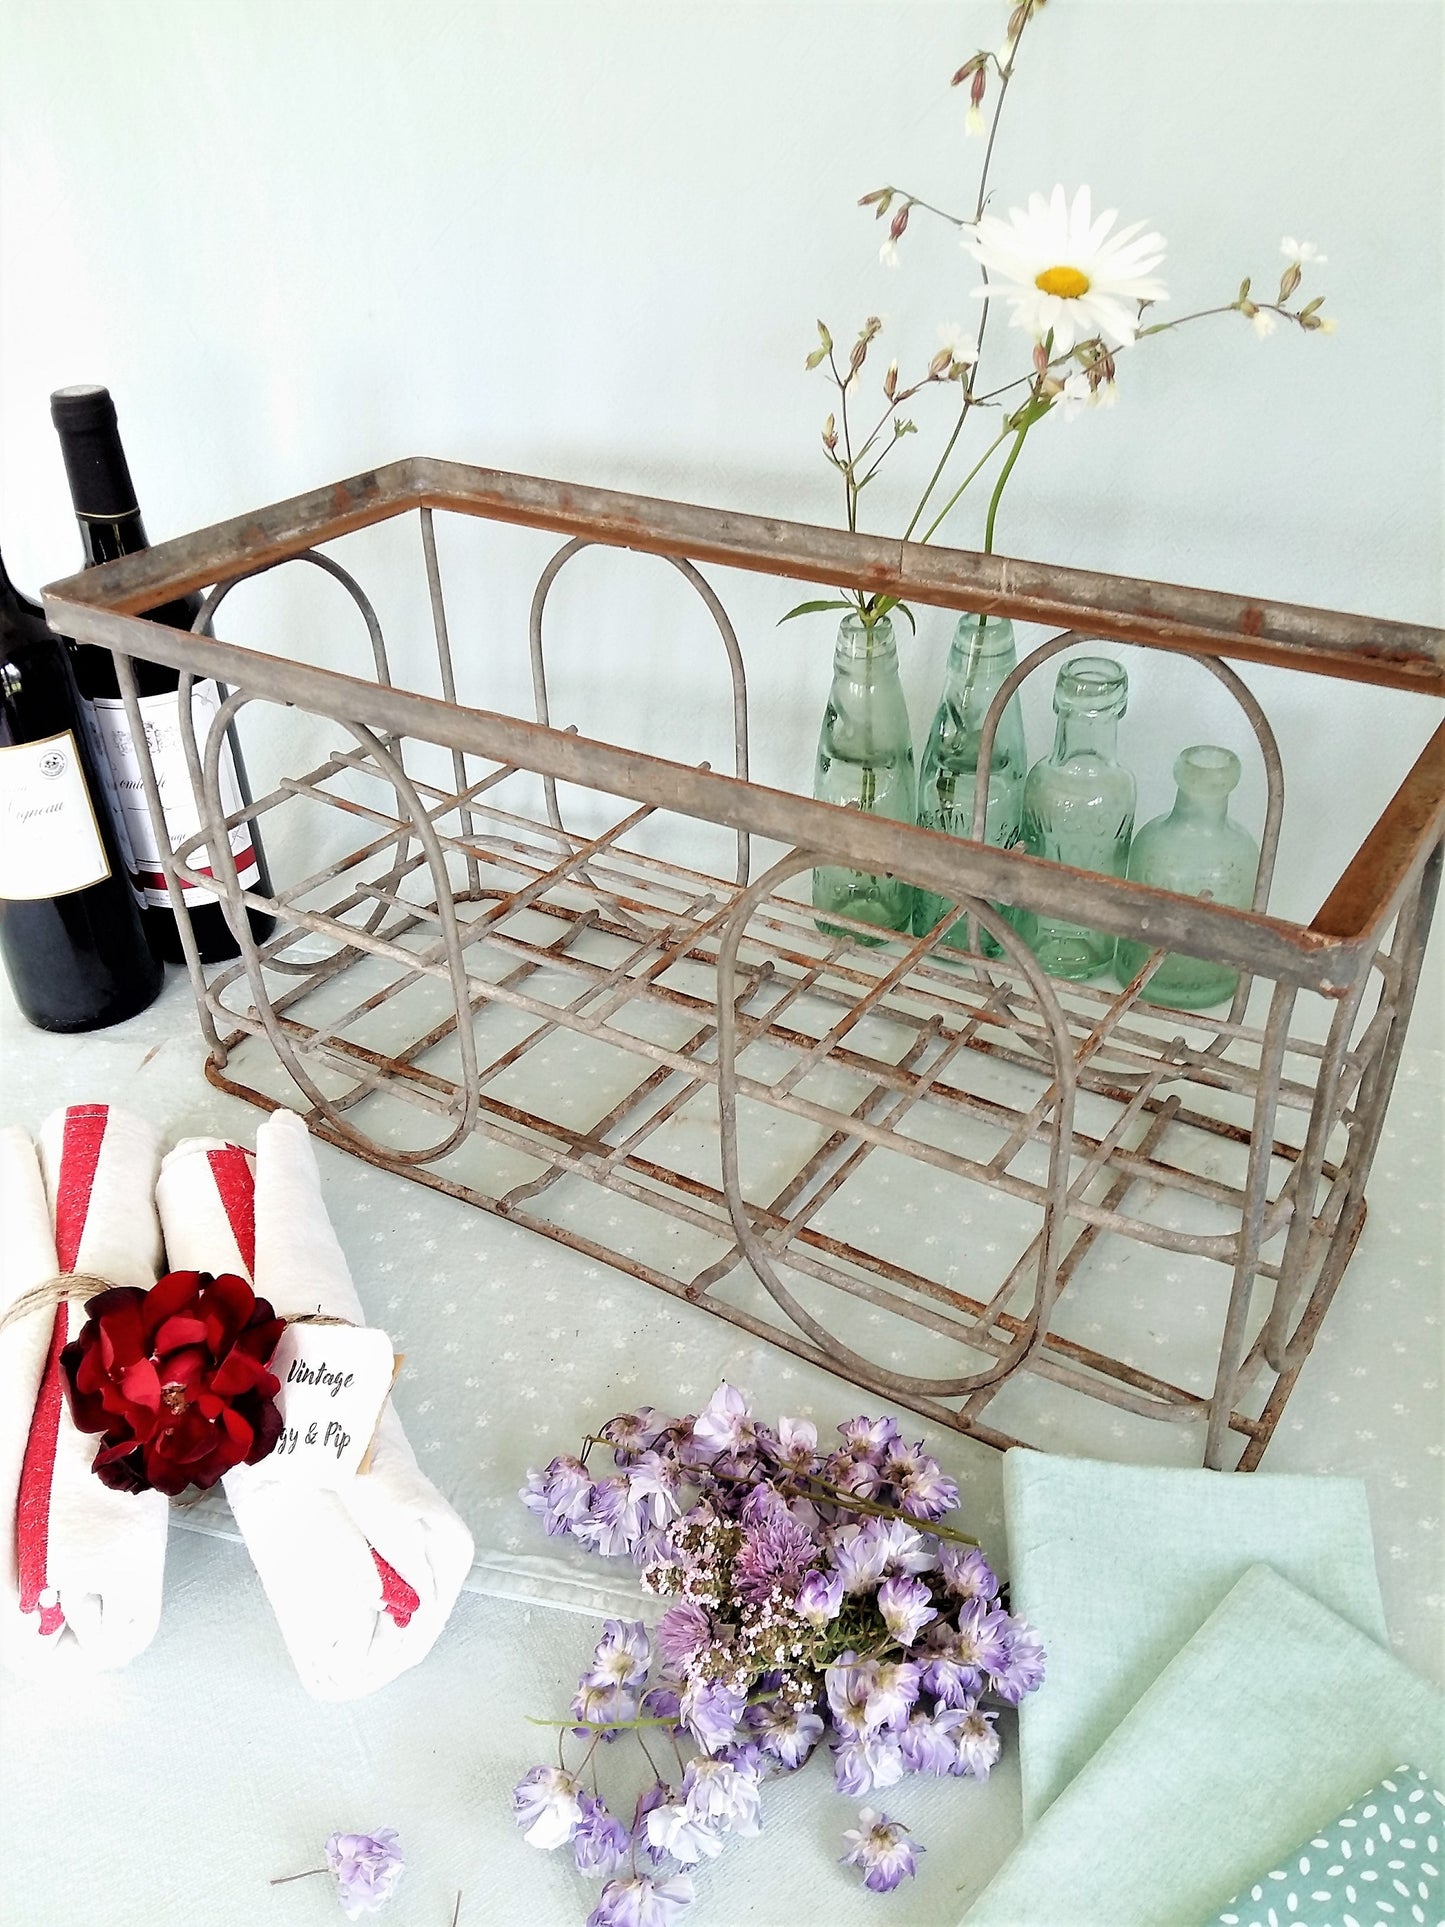 Vintage 1950s Metal Bottle Crate from Tiggy and Pip - €220.00! Shop now at Tiggy and Pip